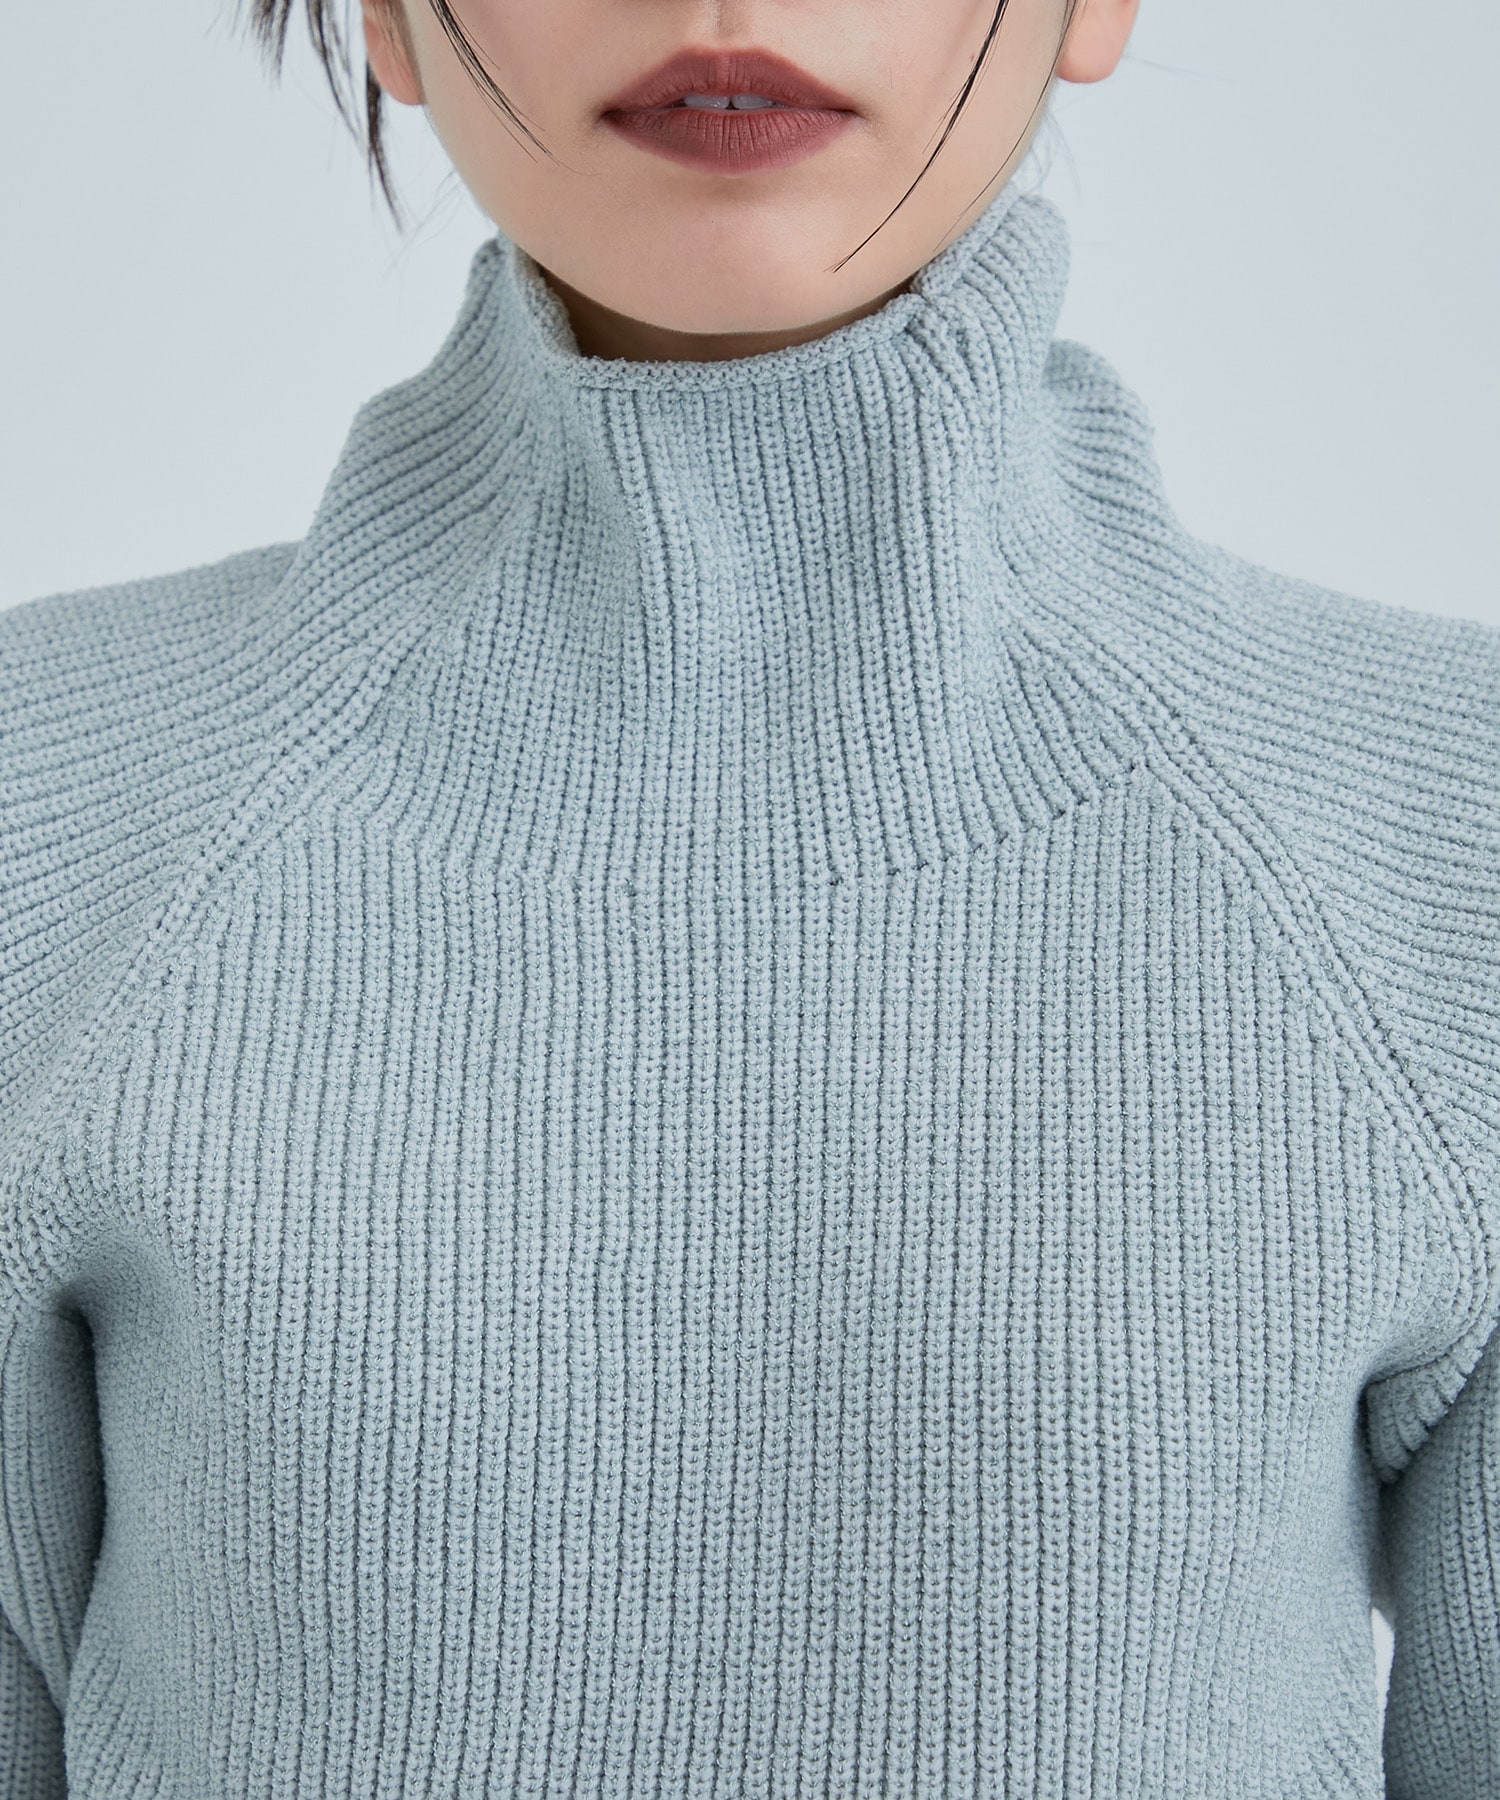 Cropped Chanky Knit Top STUDIOUS